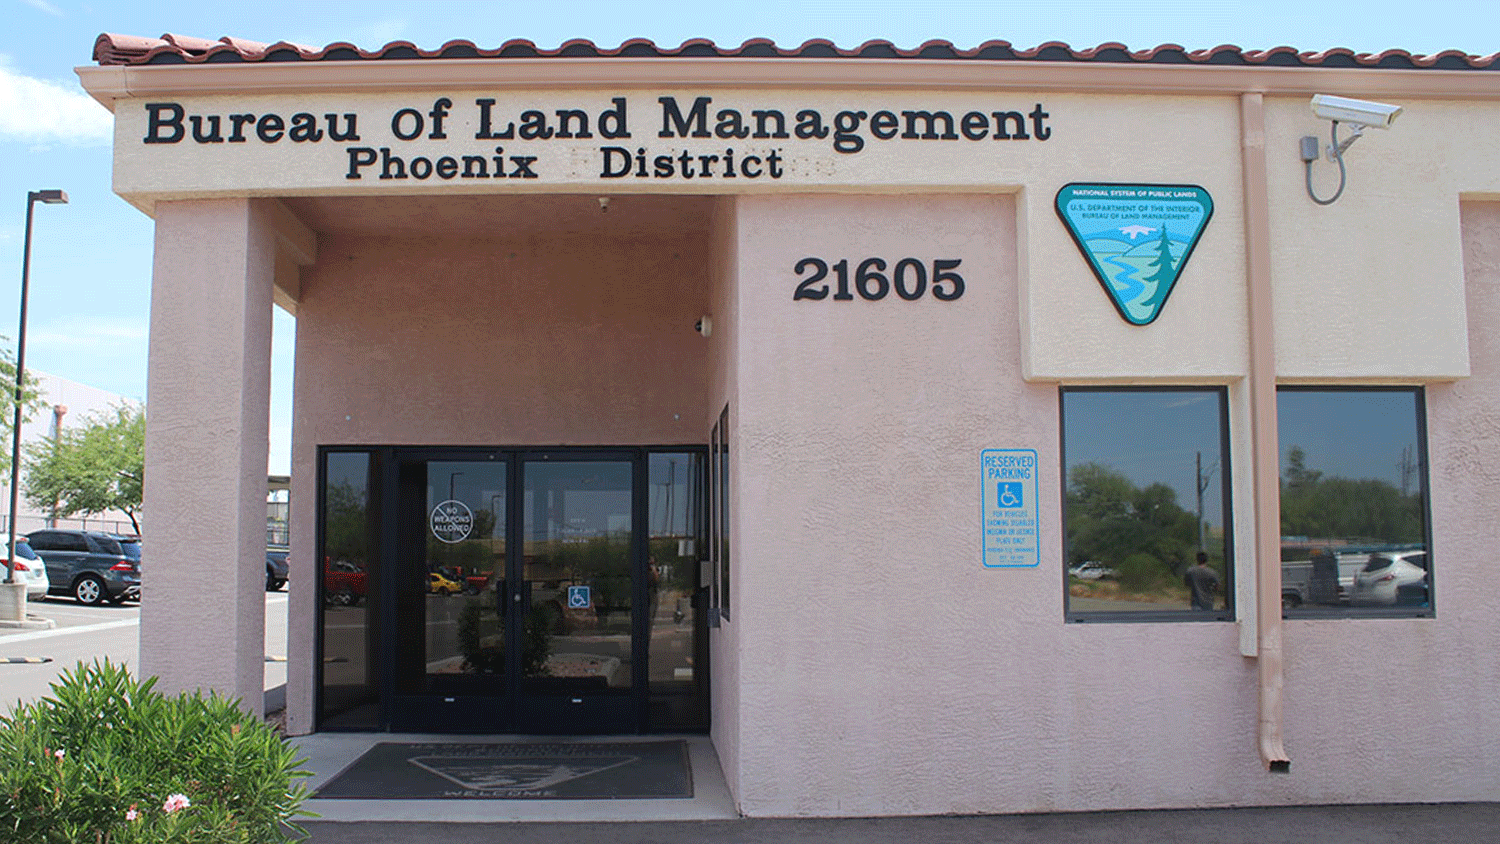 &quot;Maricopa County is the fastest growing county in the nation, and more people means increased demands for a variety of recreation activities on the public lands that surround the metro Phoenix area,&quot; says Phoenix District Manager Leon Thomas.